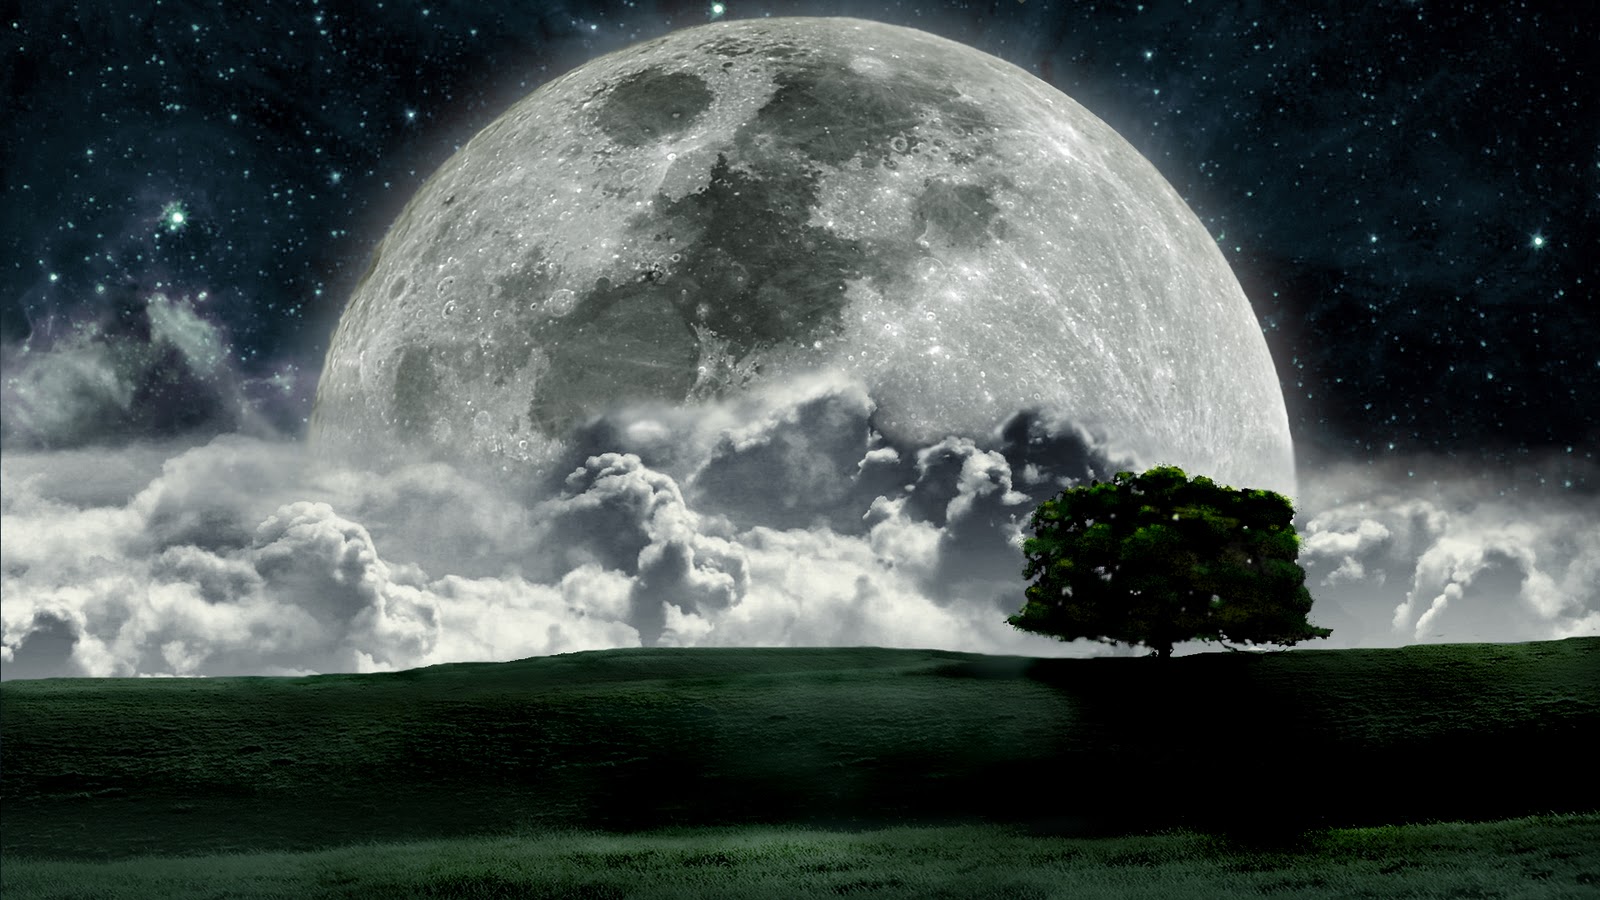 Moon Picture Of A Full Movie Wallpaper New Screensavers